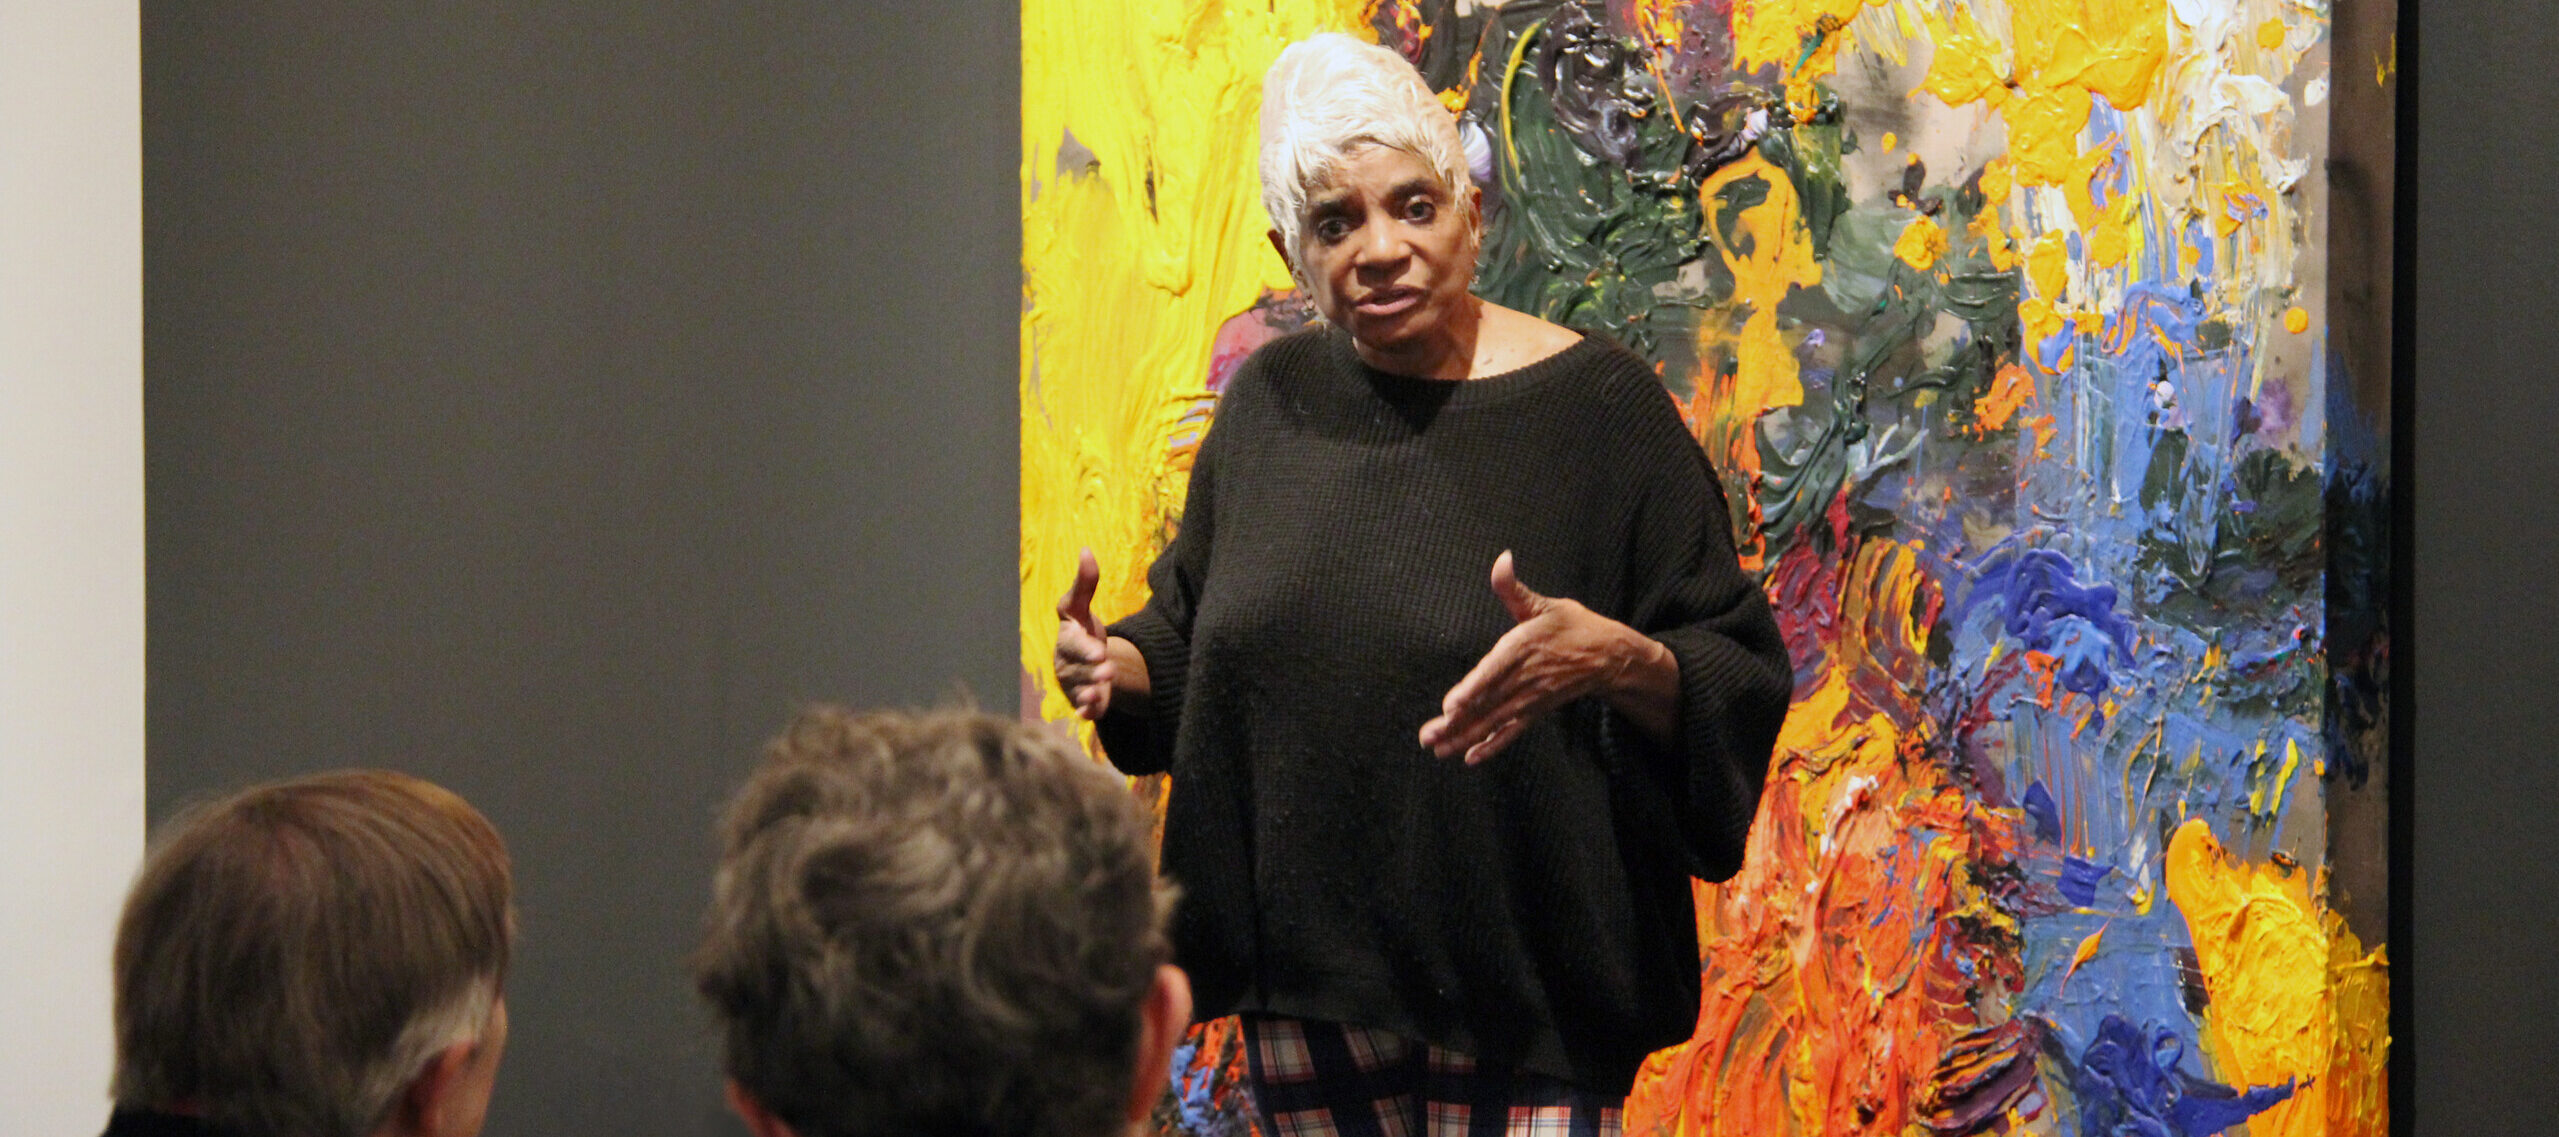 A woman with a medium-dark skin tone and white, short hair, is standing in front of a colorful abstract painting talking to an audience.